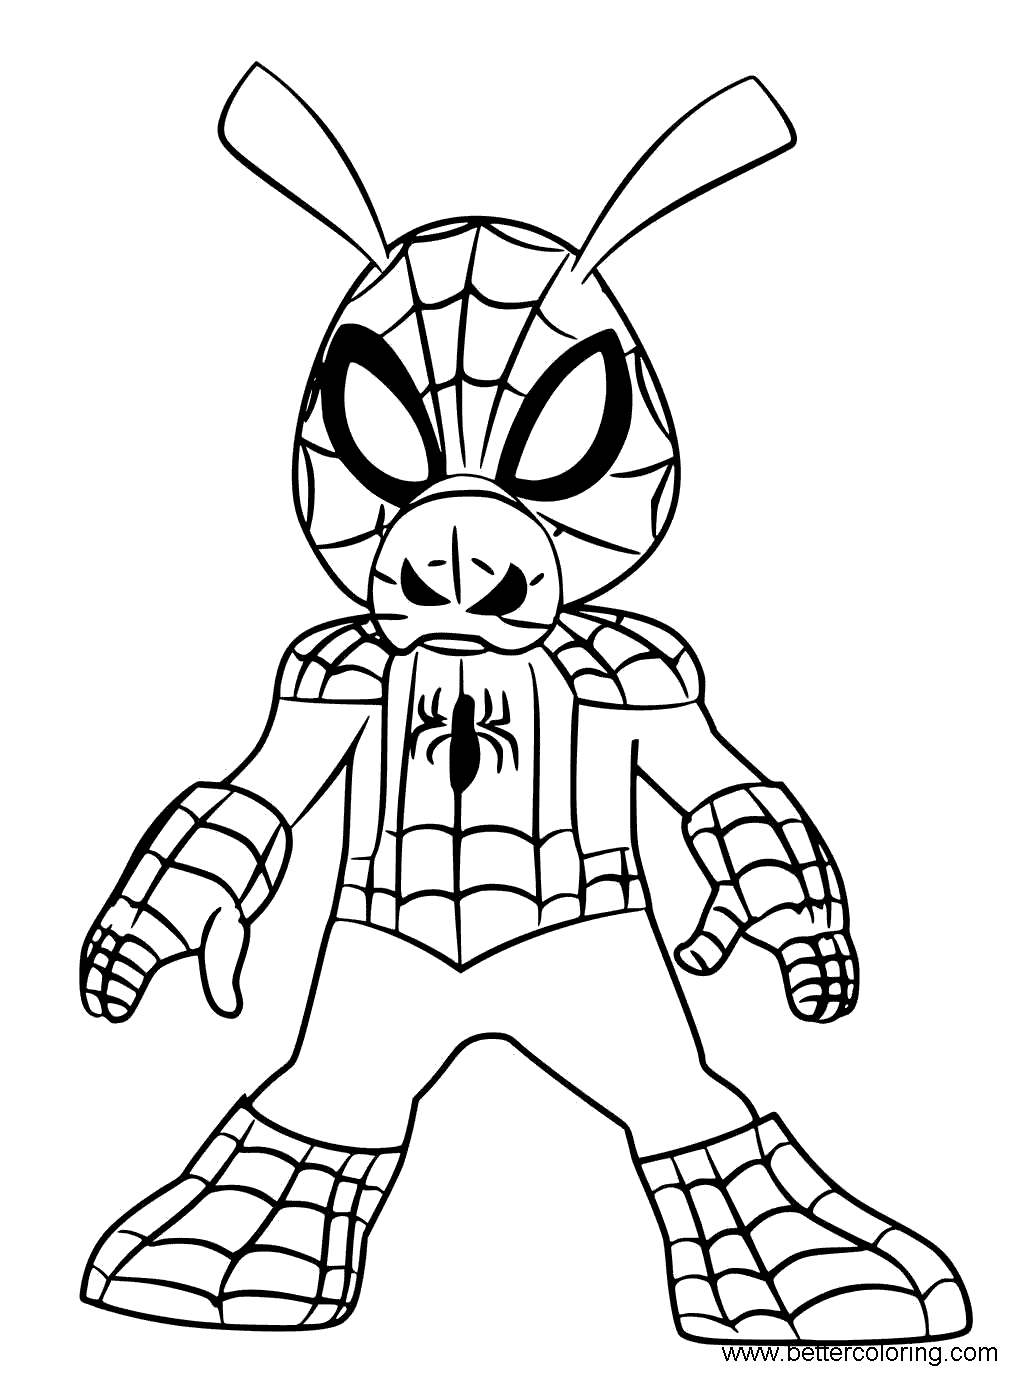 Miles Morales Coloring Pages Spider Ham  Free Printable Coloring Pages